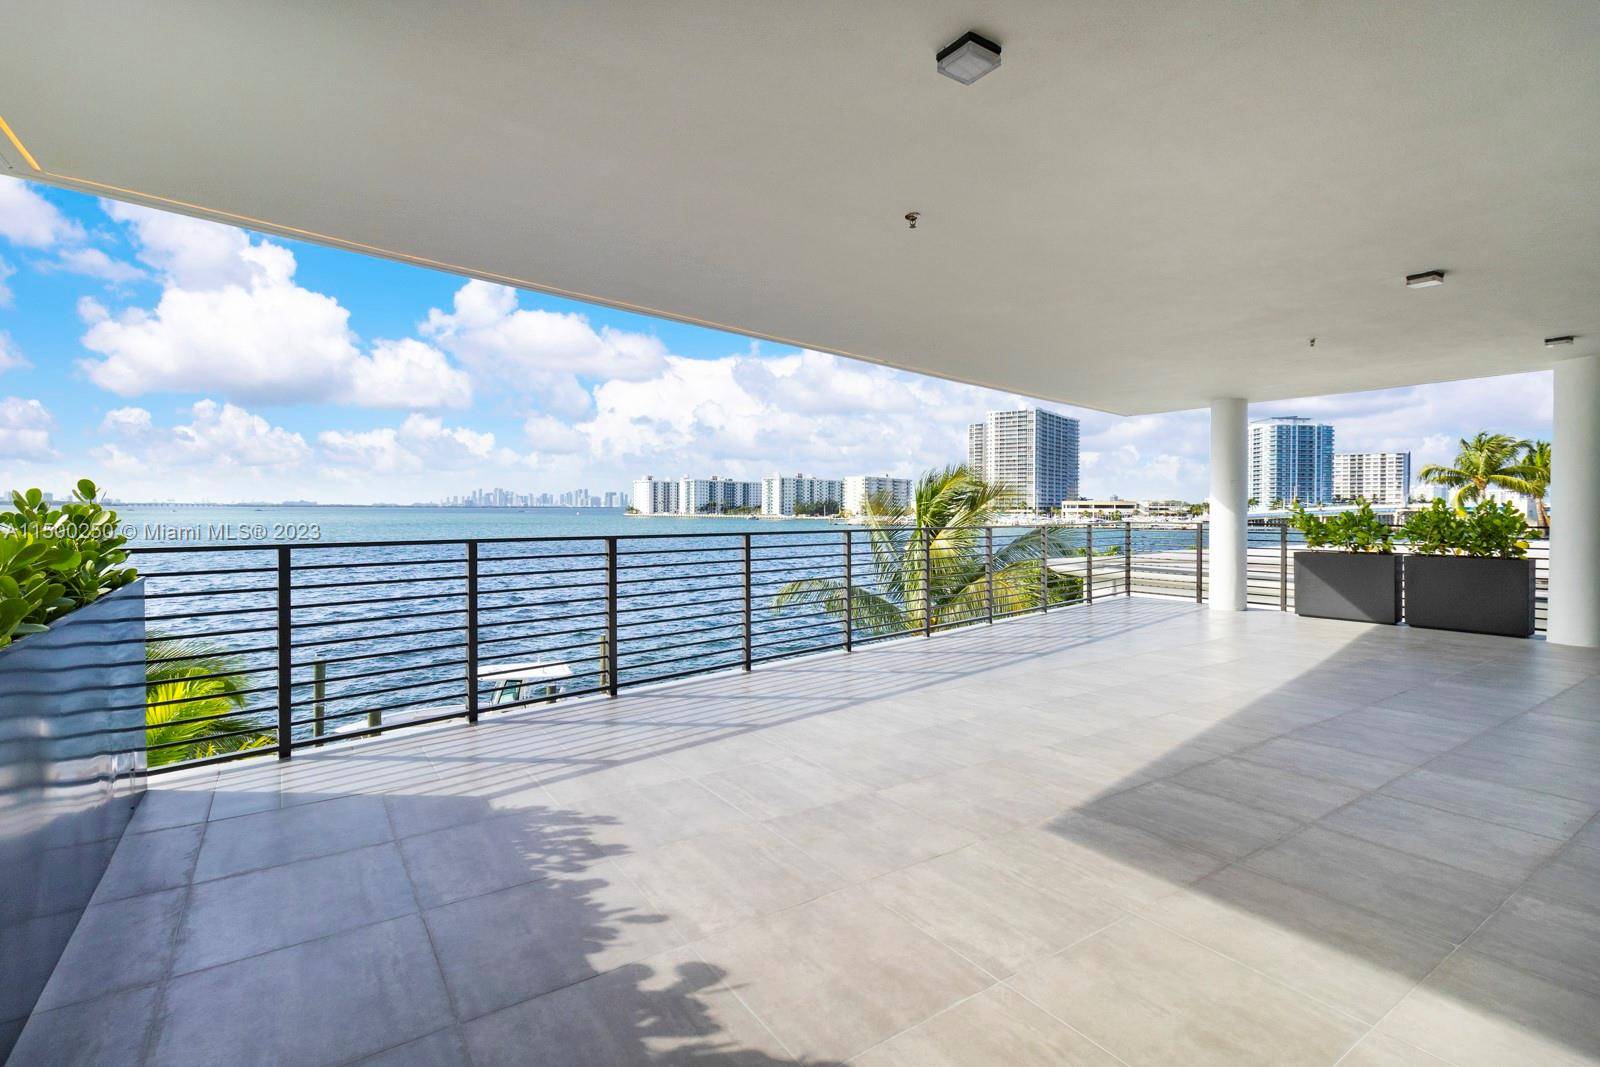 Introducing 1930 Bay Dr 3 a luxurious new waterfront residence in Miami Beach.